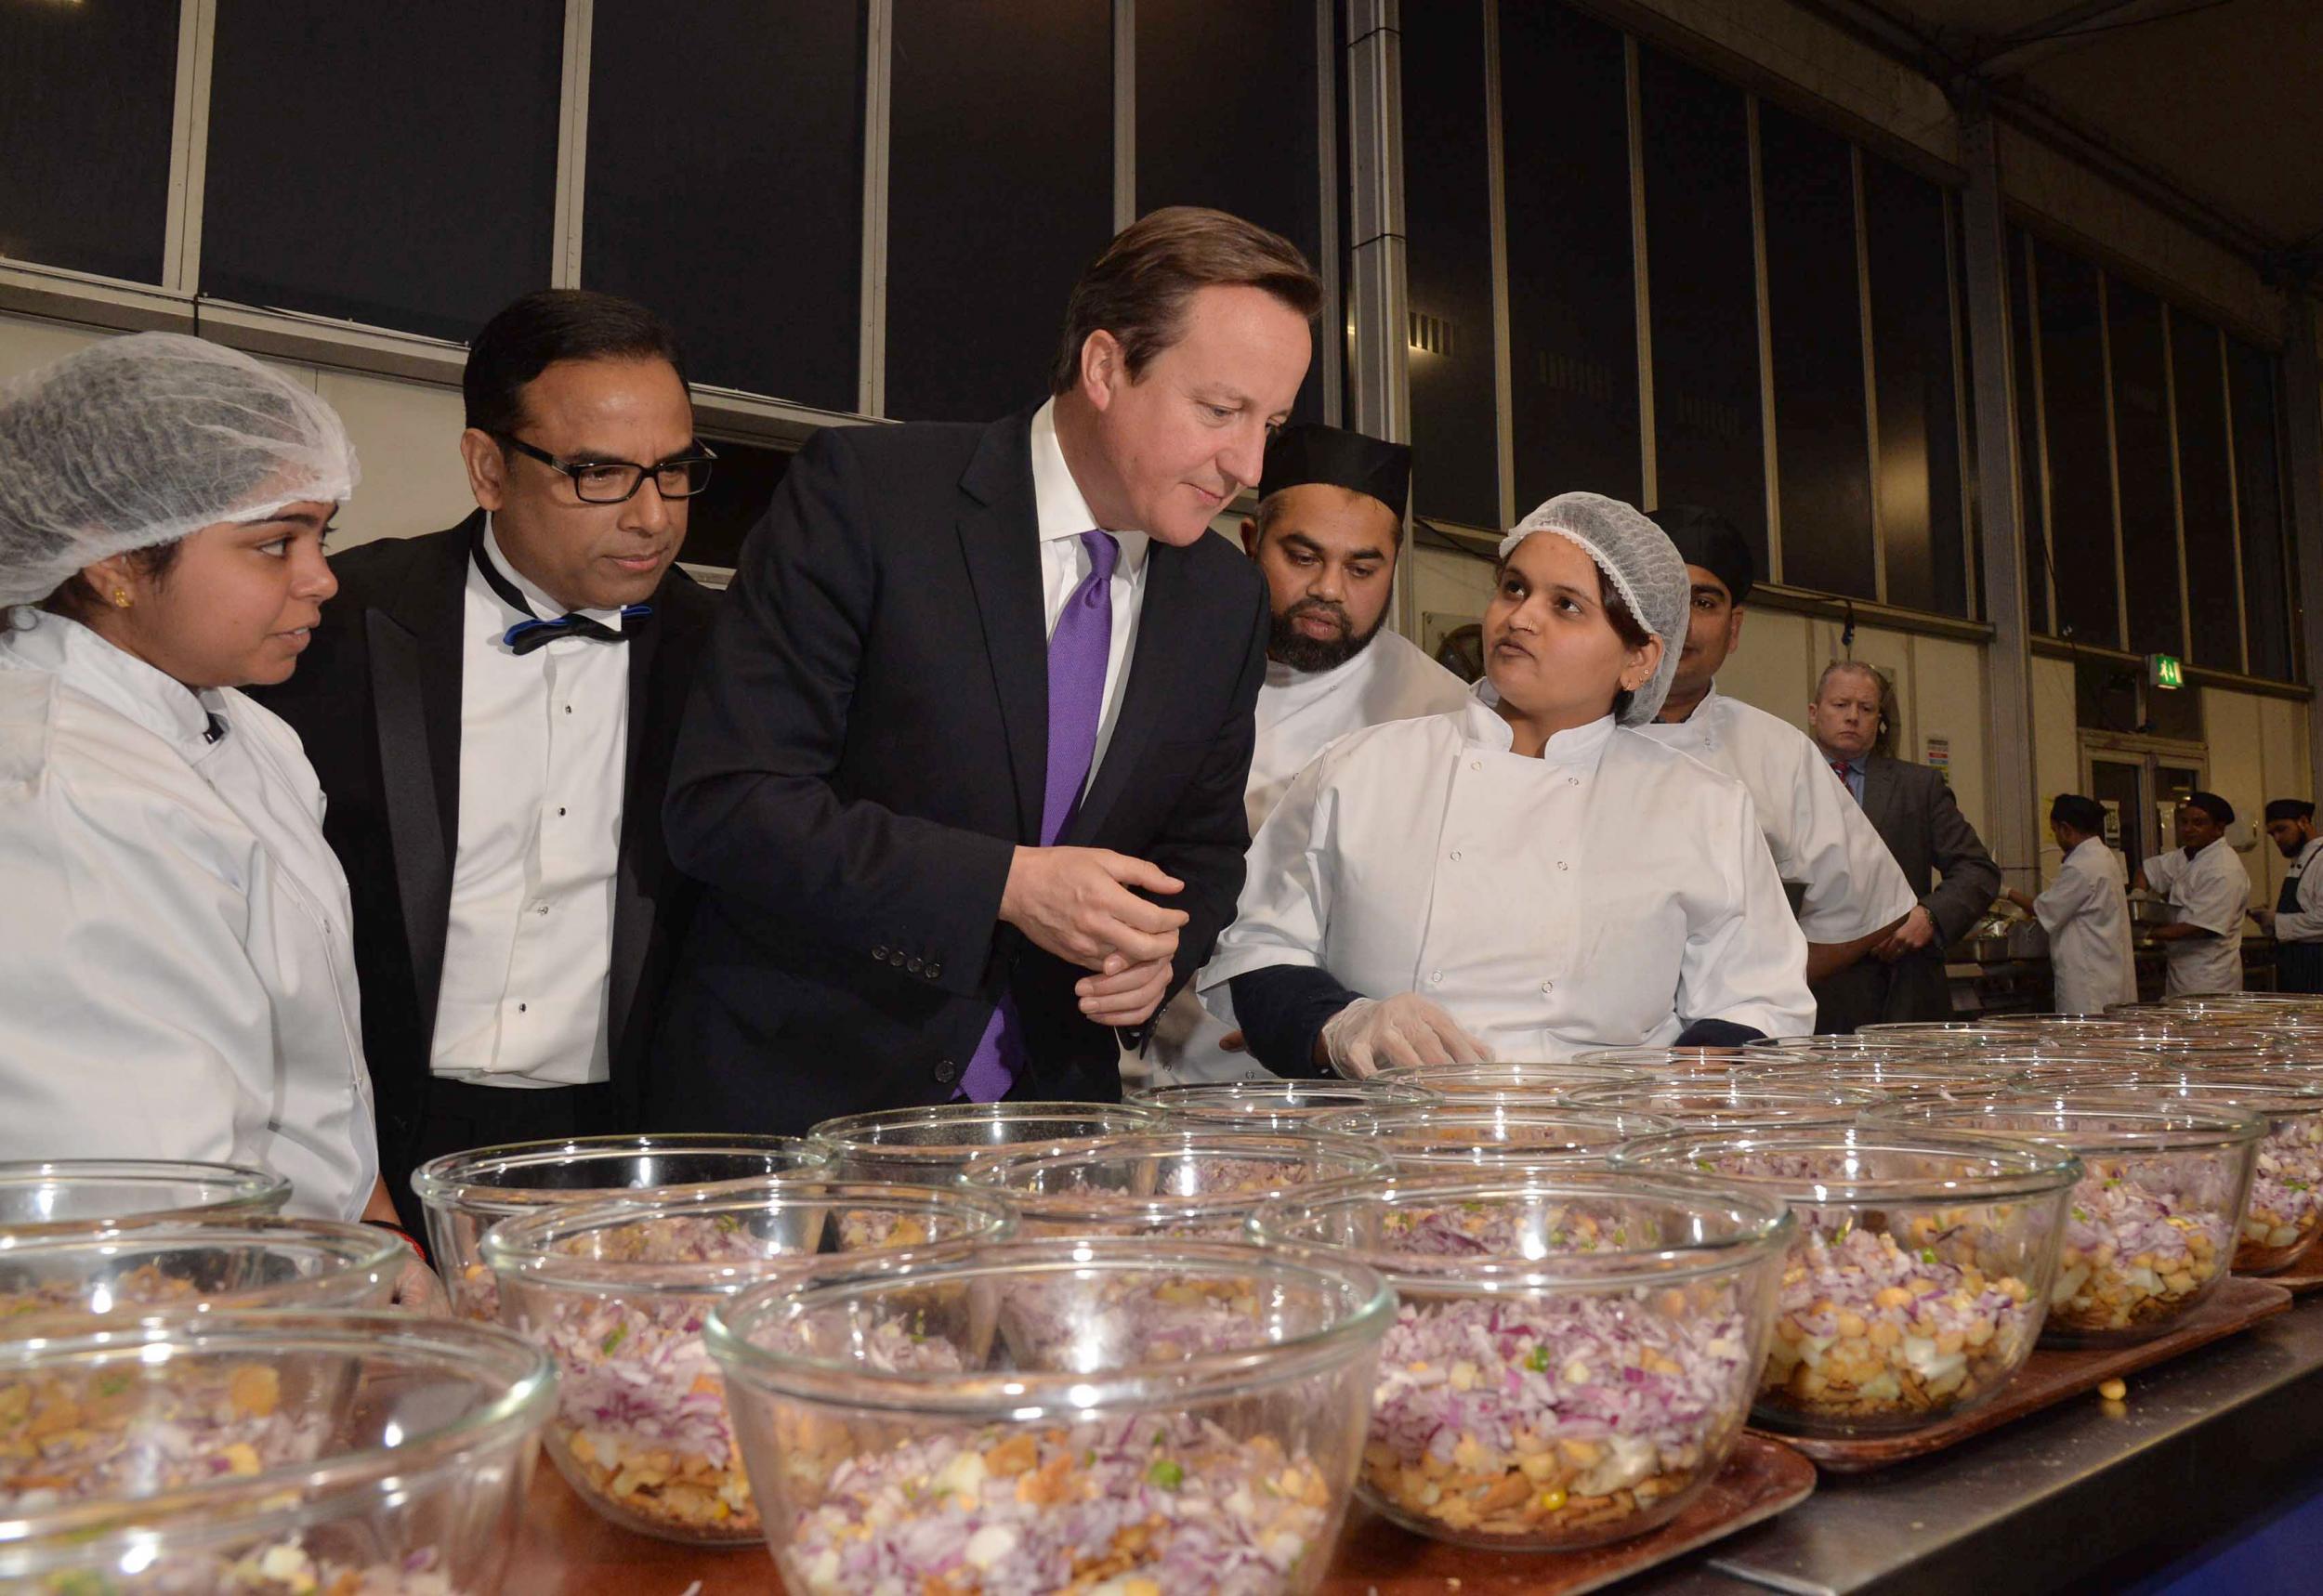 Curry Awards founder Enam Ali with Prime Minister David Cameron inspecting the winner's kitchen at the awards in 2013